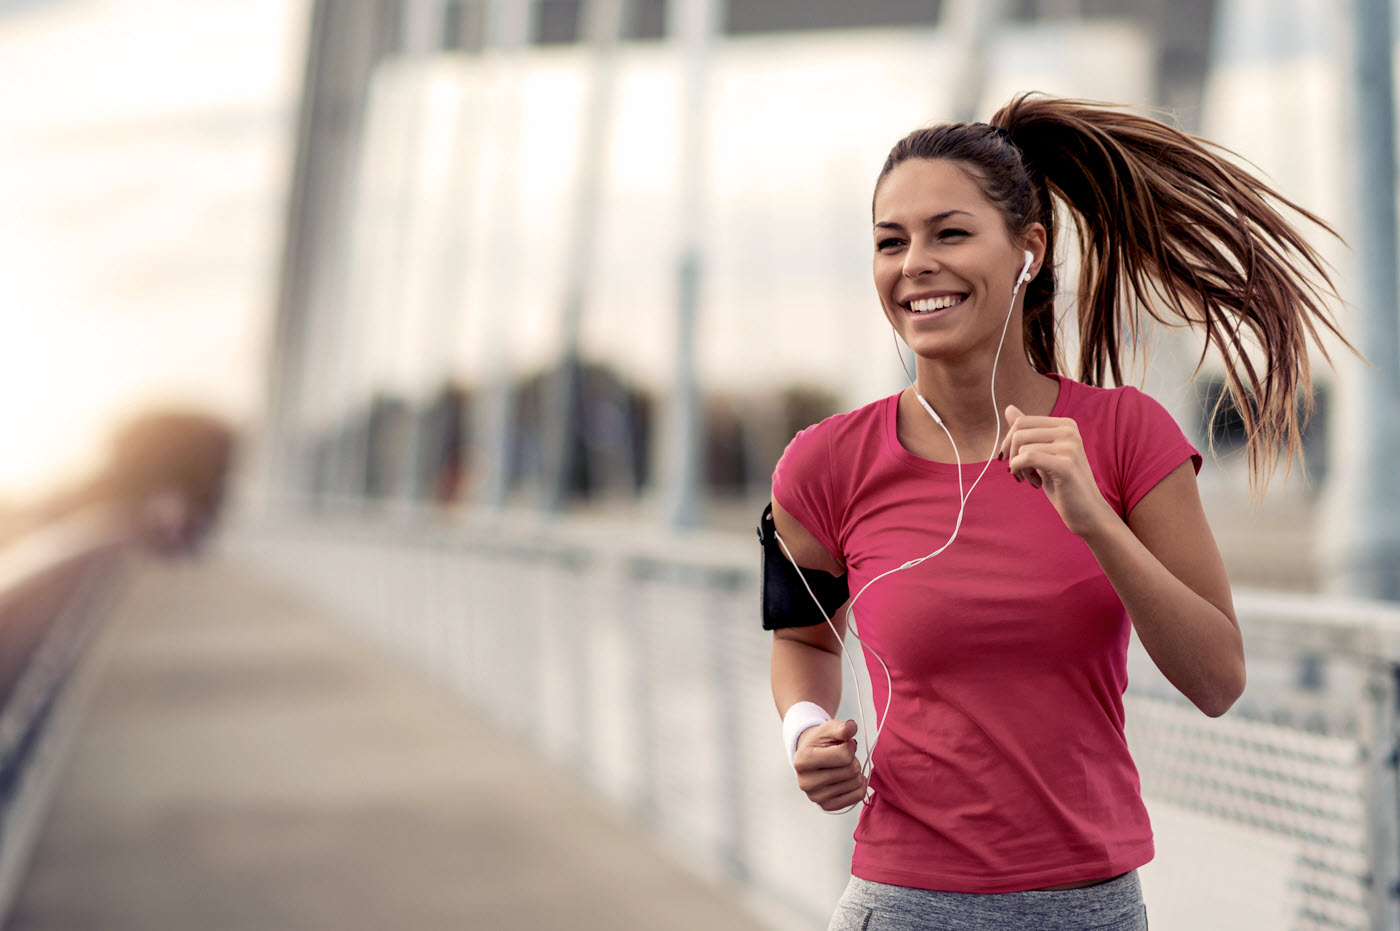 A woman with headphones in running and smiling.